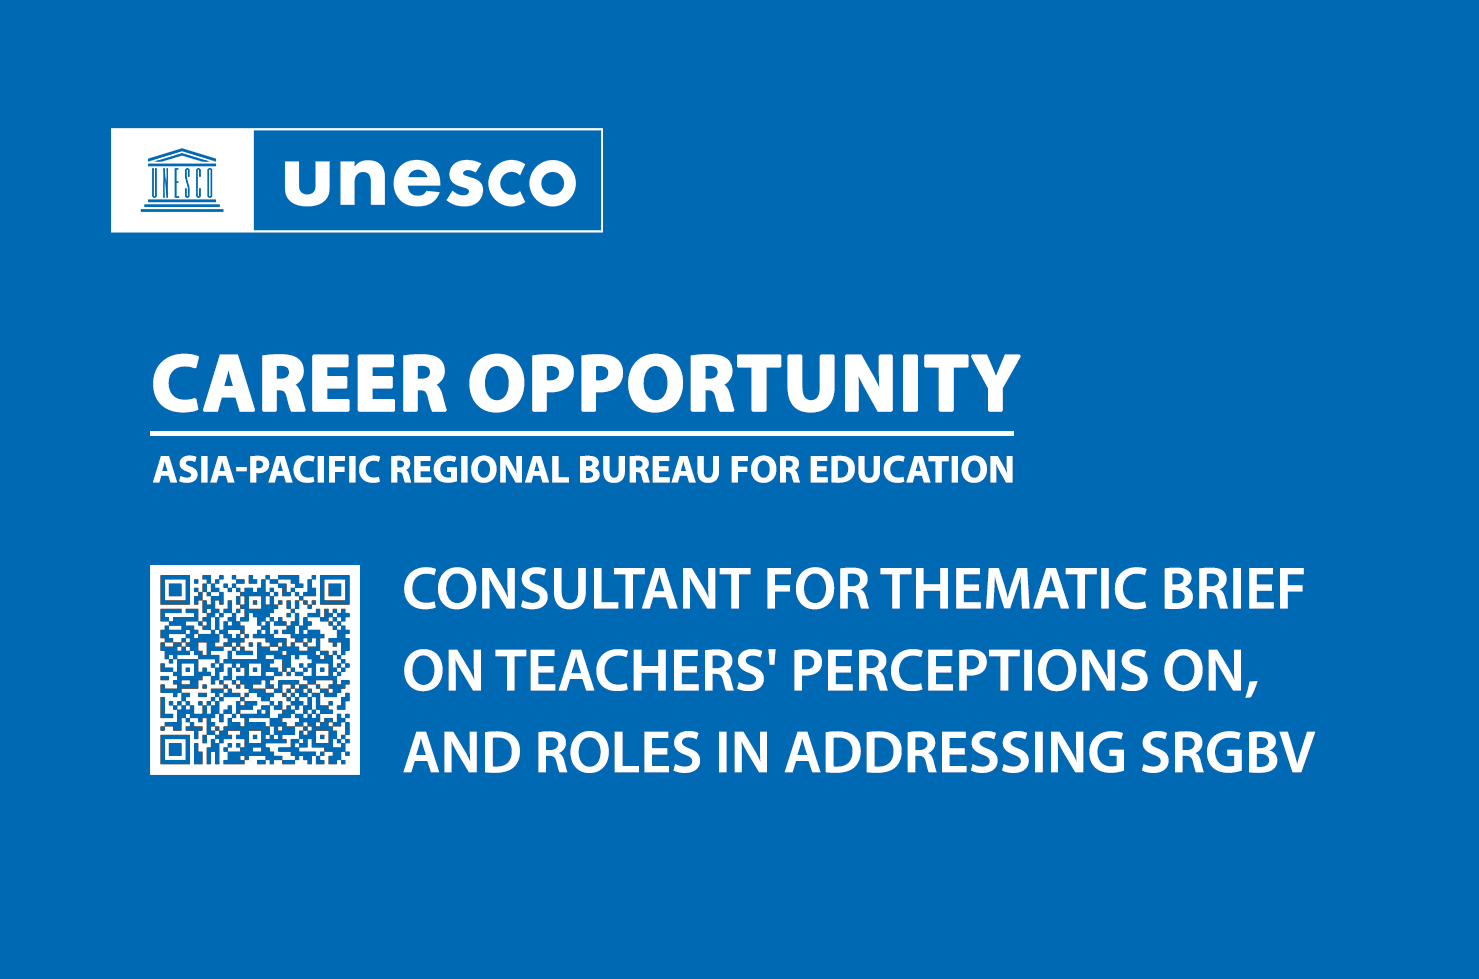 Call for Consultancy: Thematic brief on teachers' perceptions on, and roles in addressing SRGBV